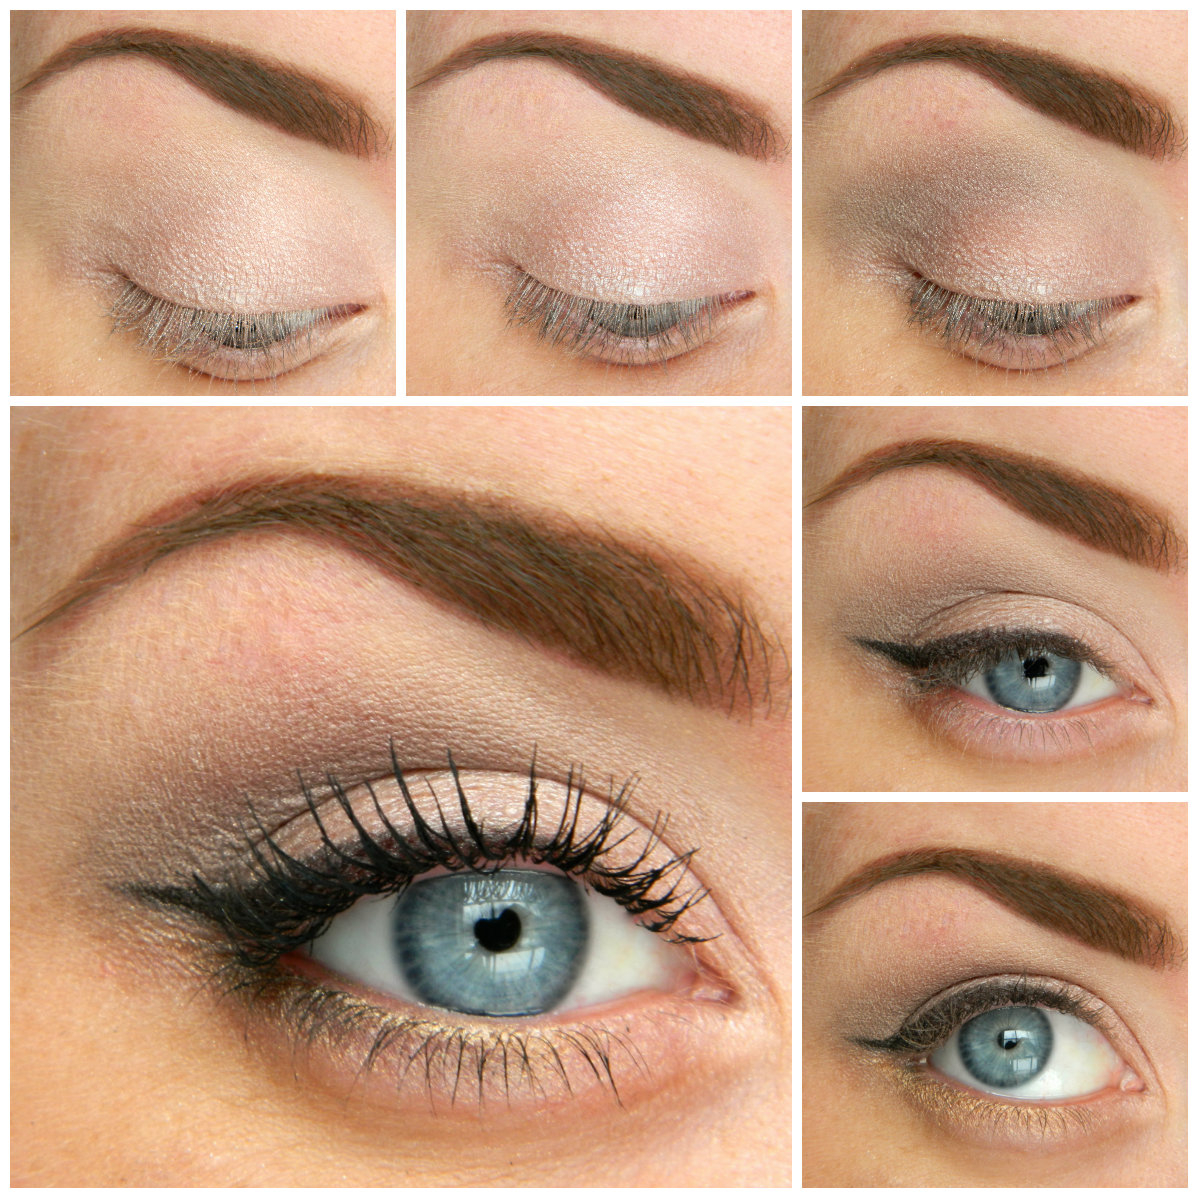 Natural Eye Makeup 5 Ways To Make Blue Eyes Pop With Proper Eye Makeup Her Style Code